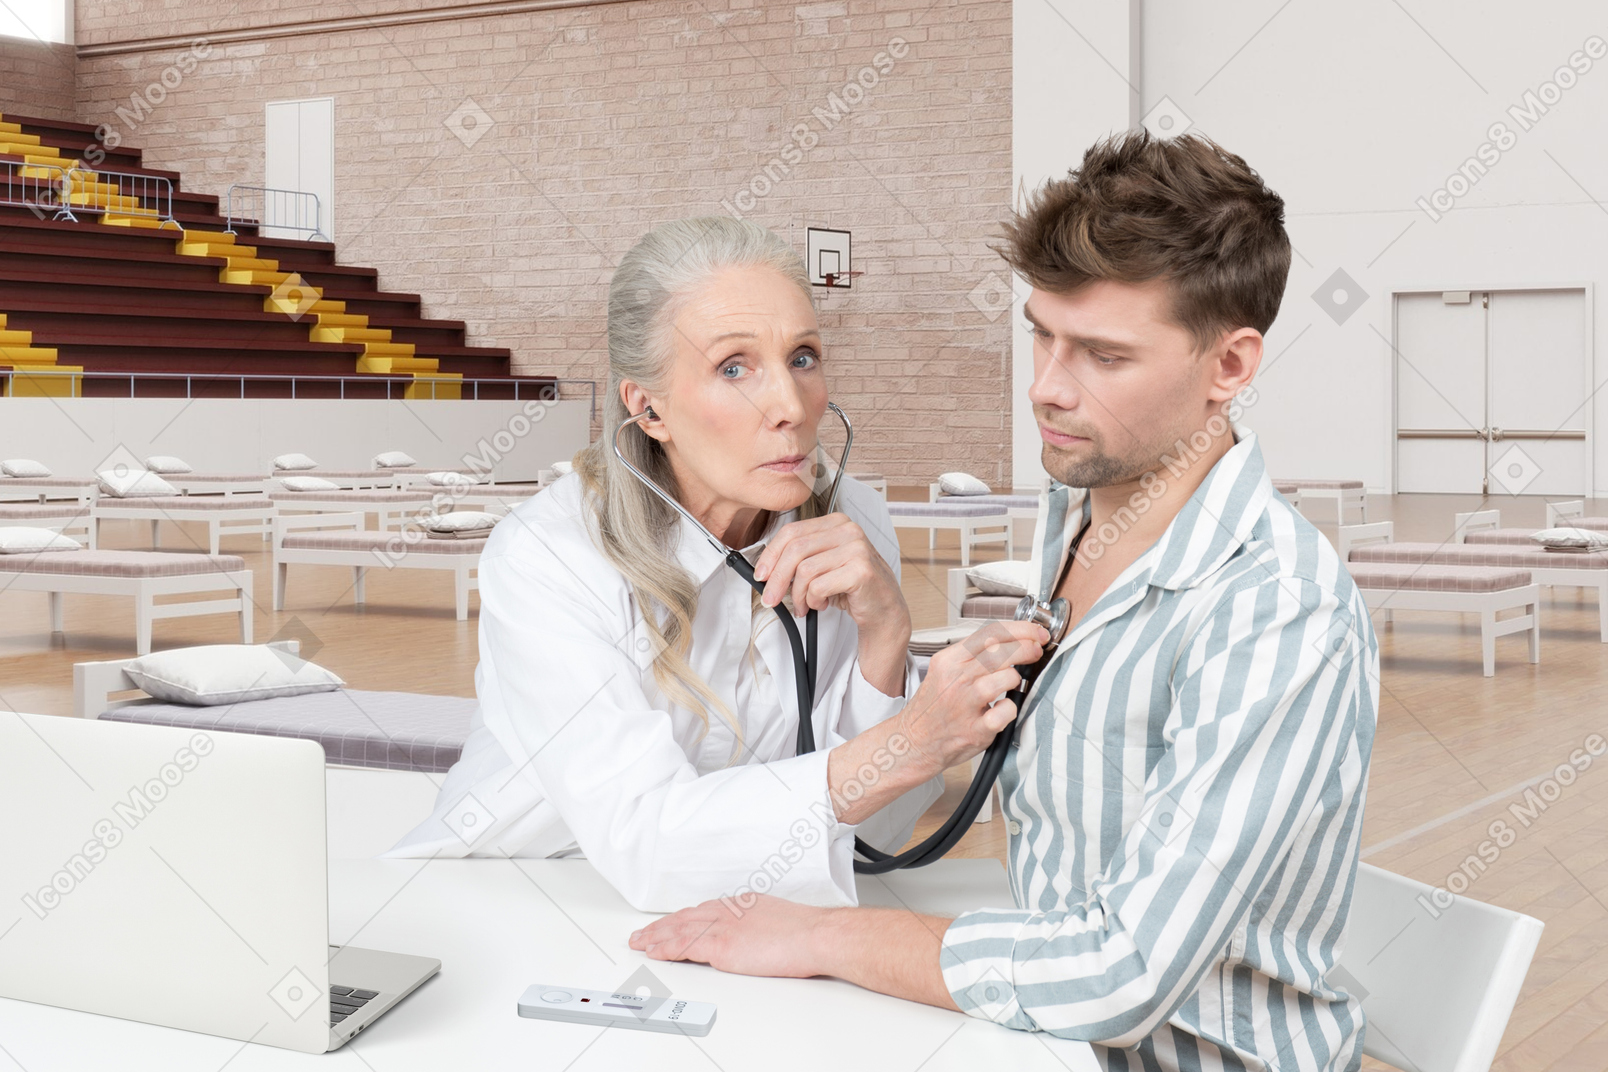 A doctor examines a patient with stethoscope